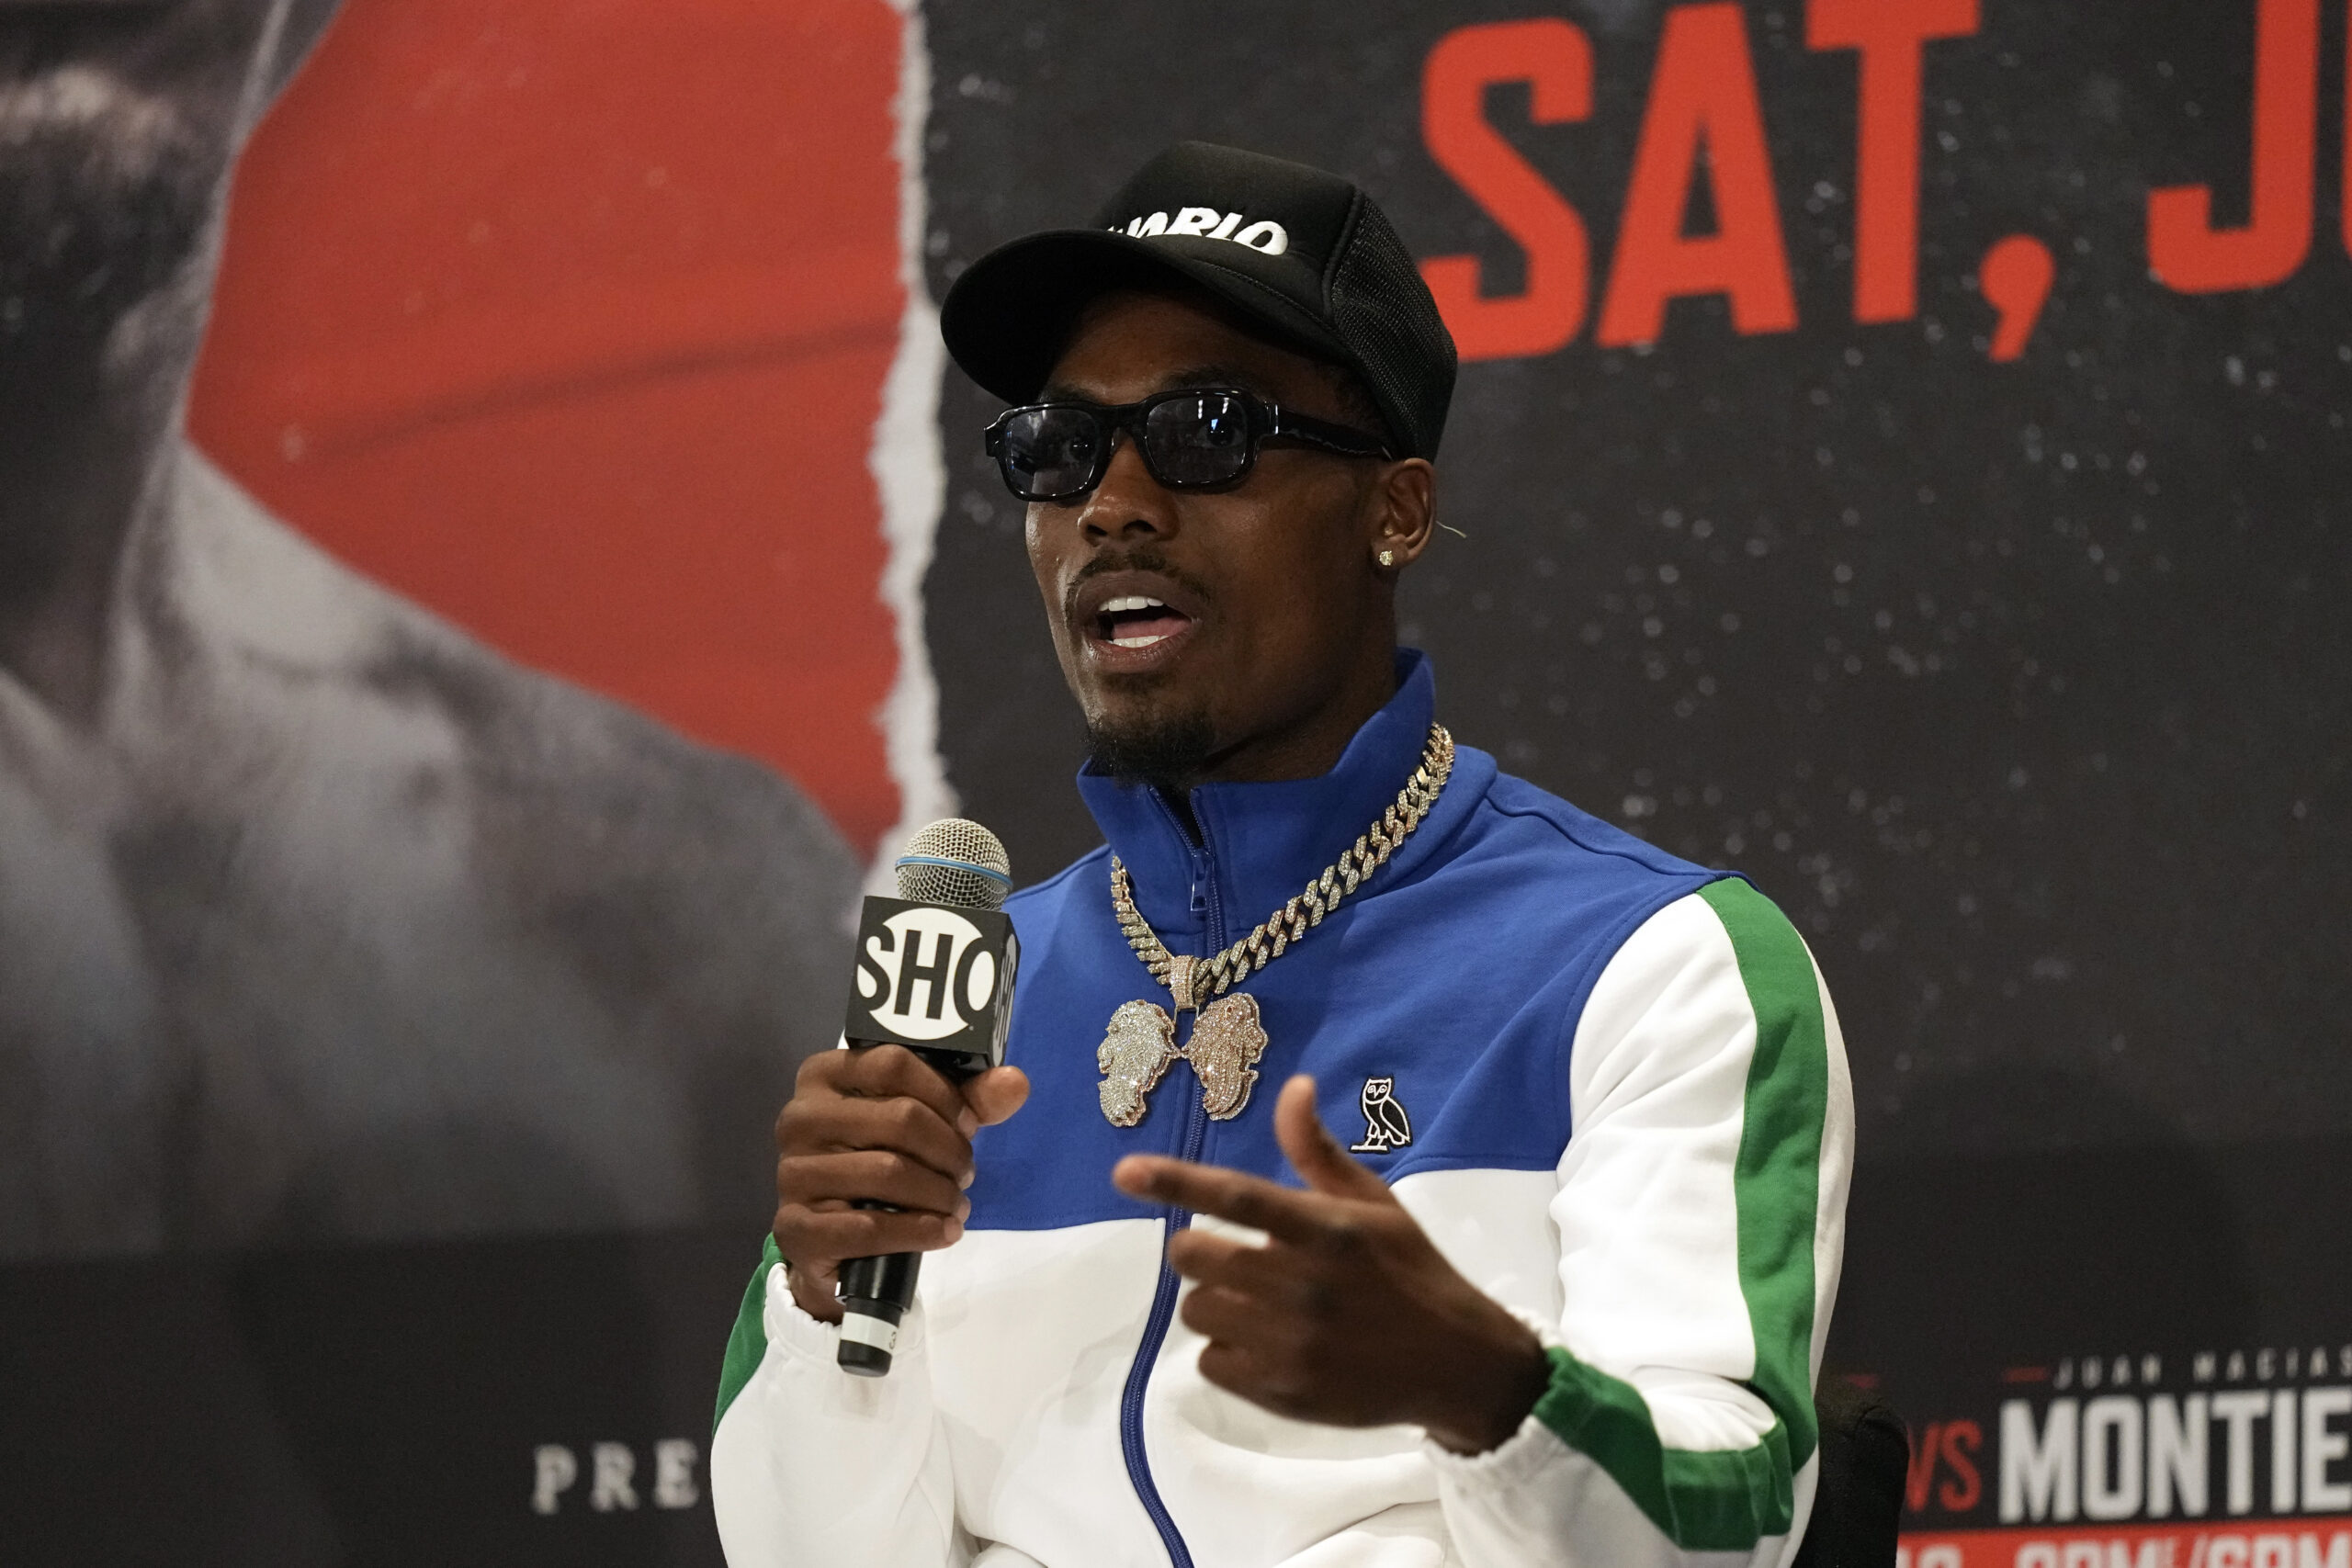 fighting-canelo-alvarez-or-his-retirement:-jermall-charlo-talks-about-his-future